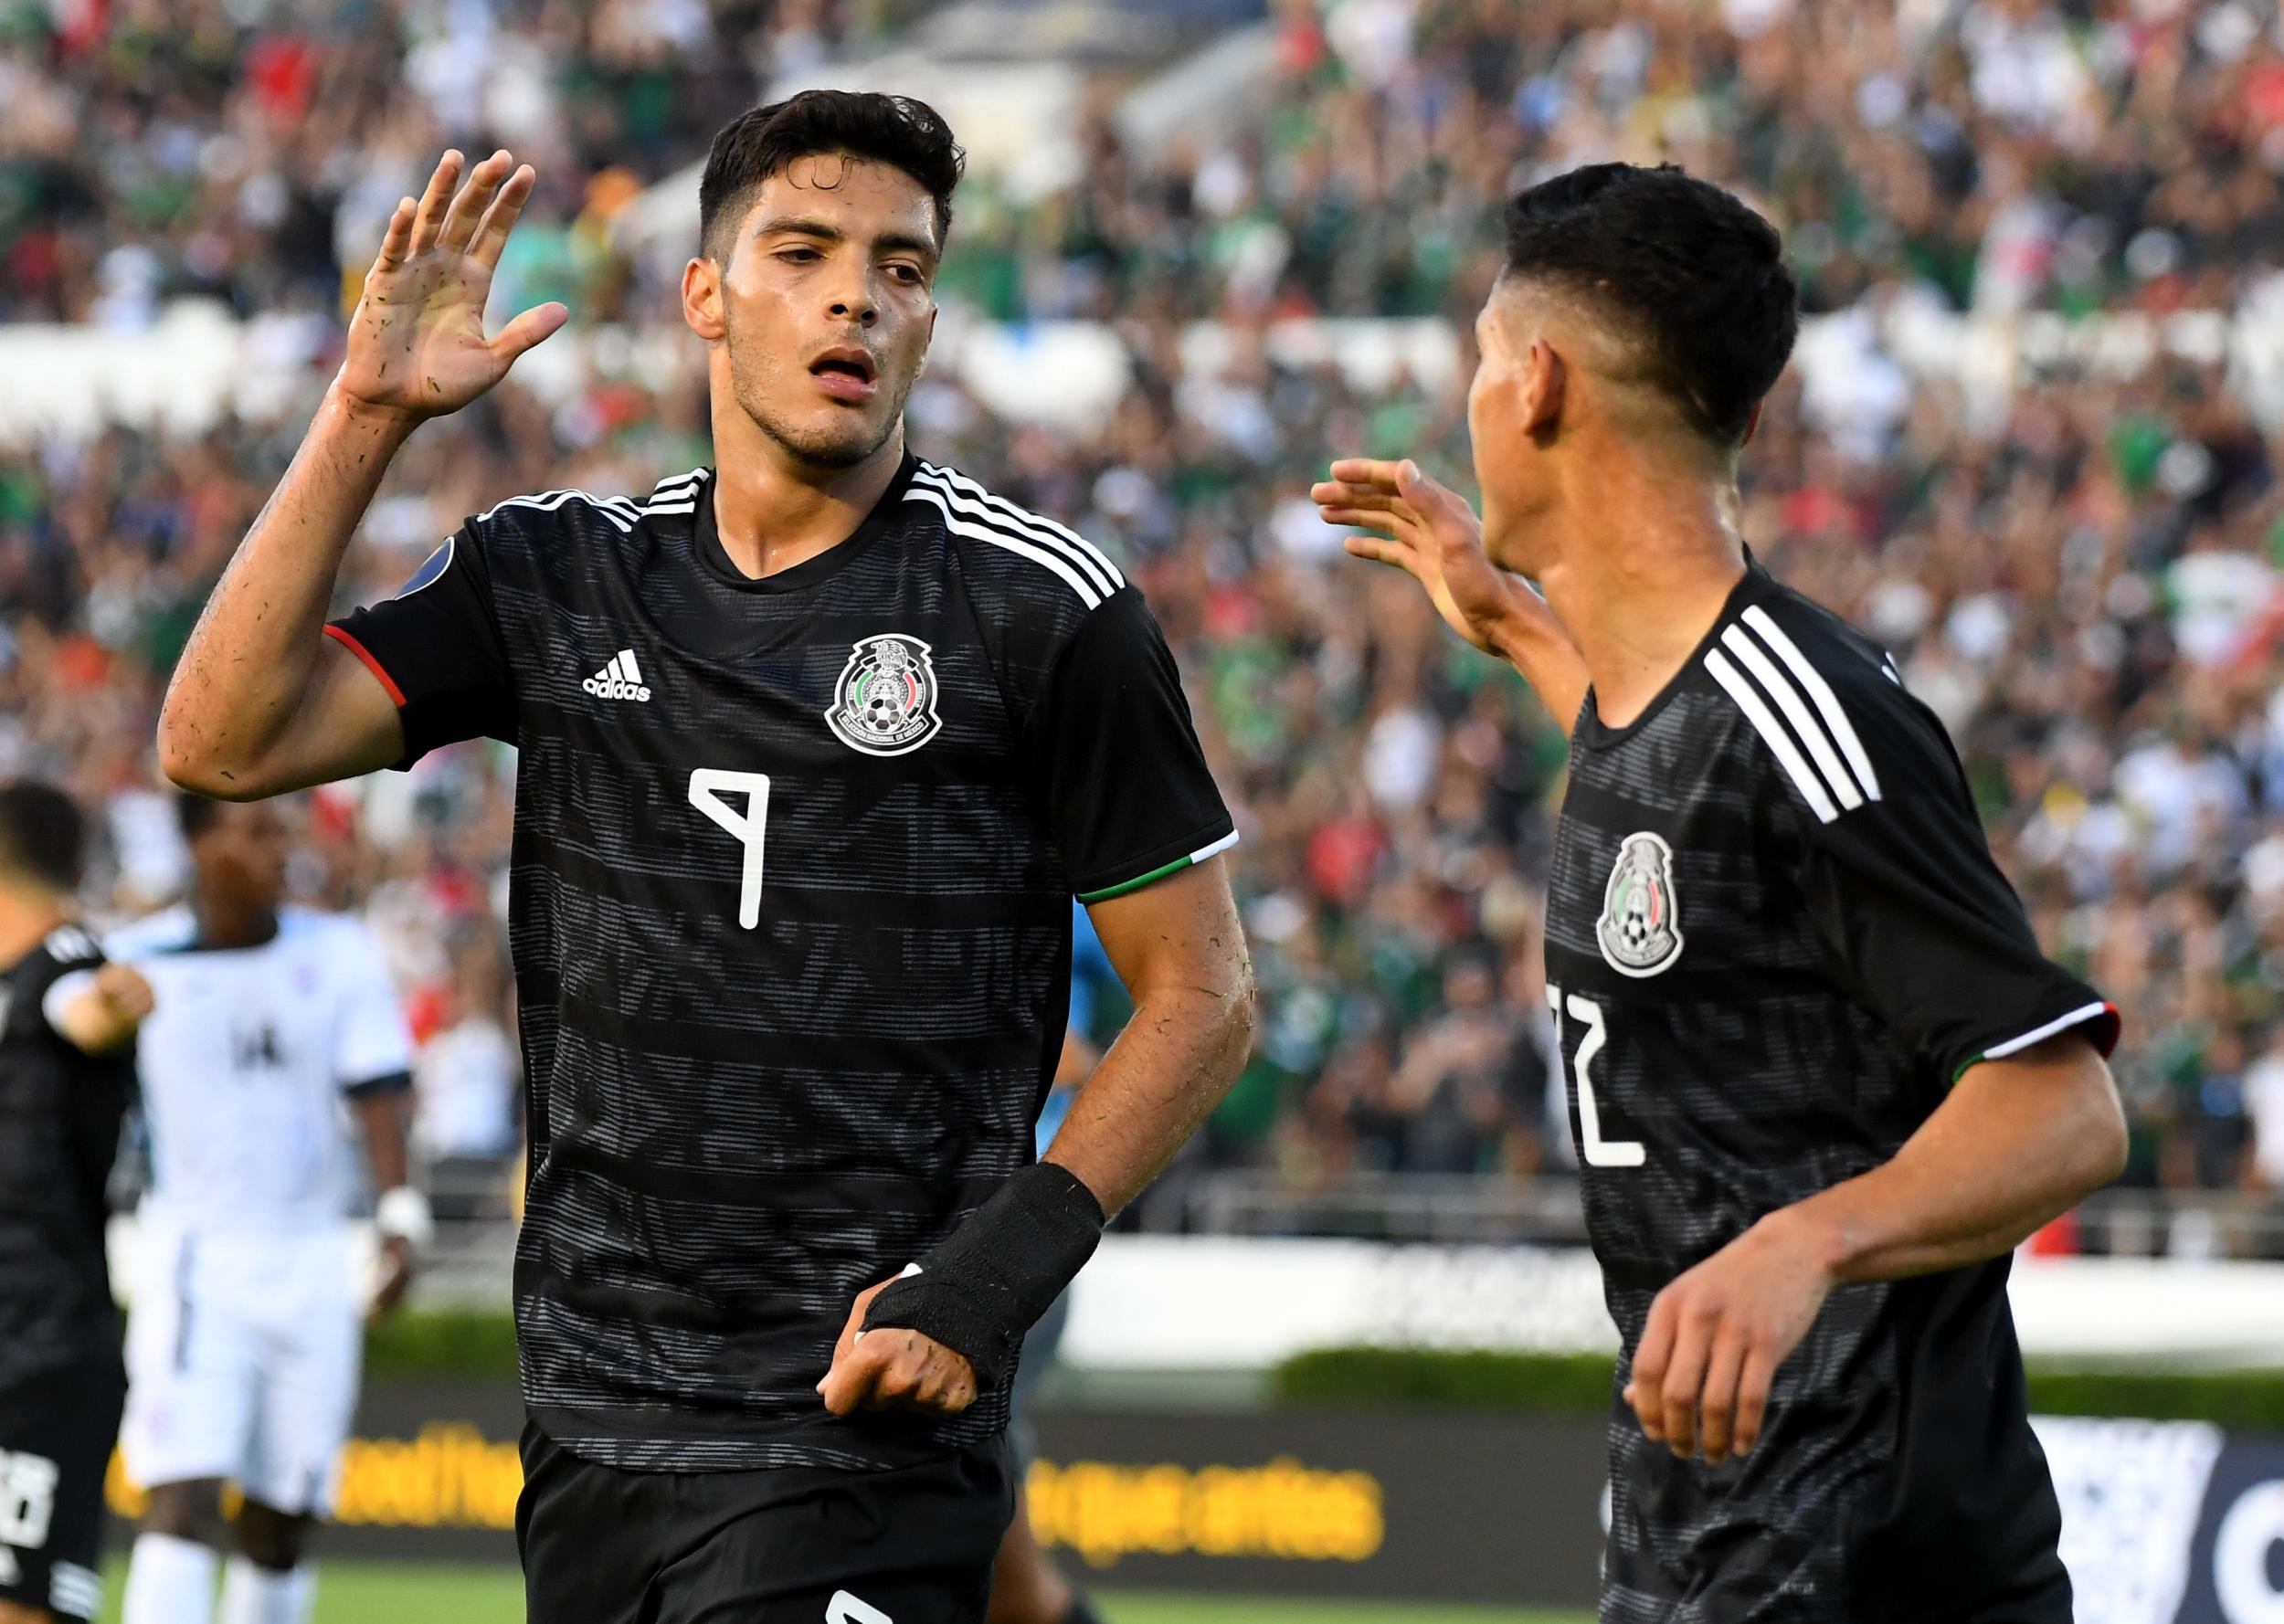 Coronavirus: Mexico national team cancel international fixtures against Czech Republic and Greece in March